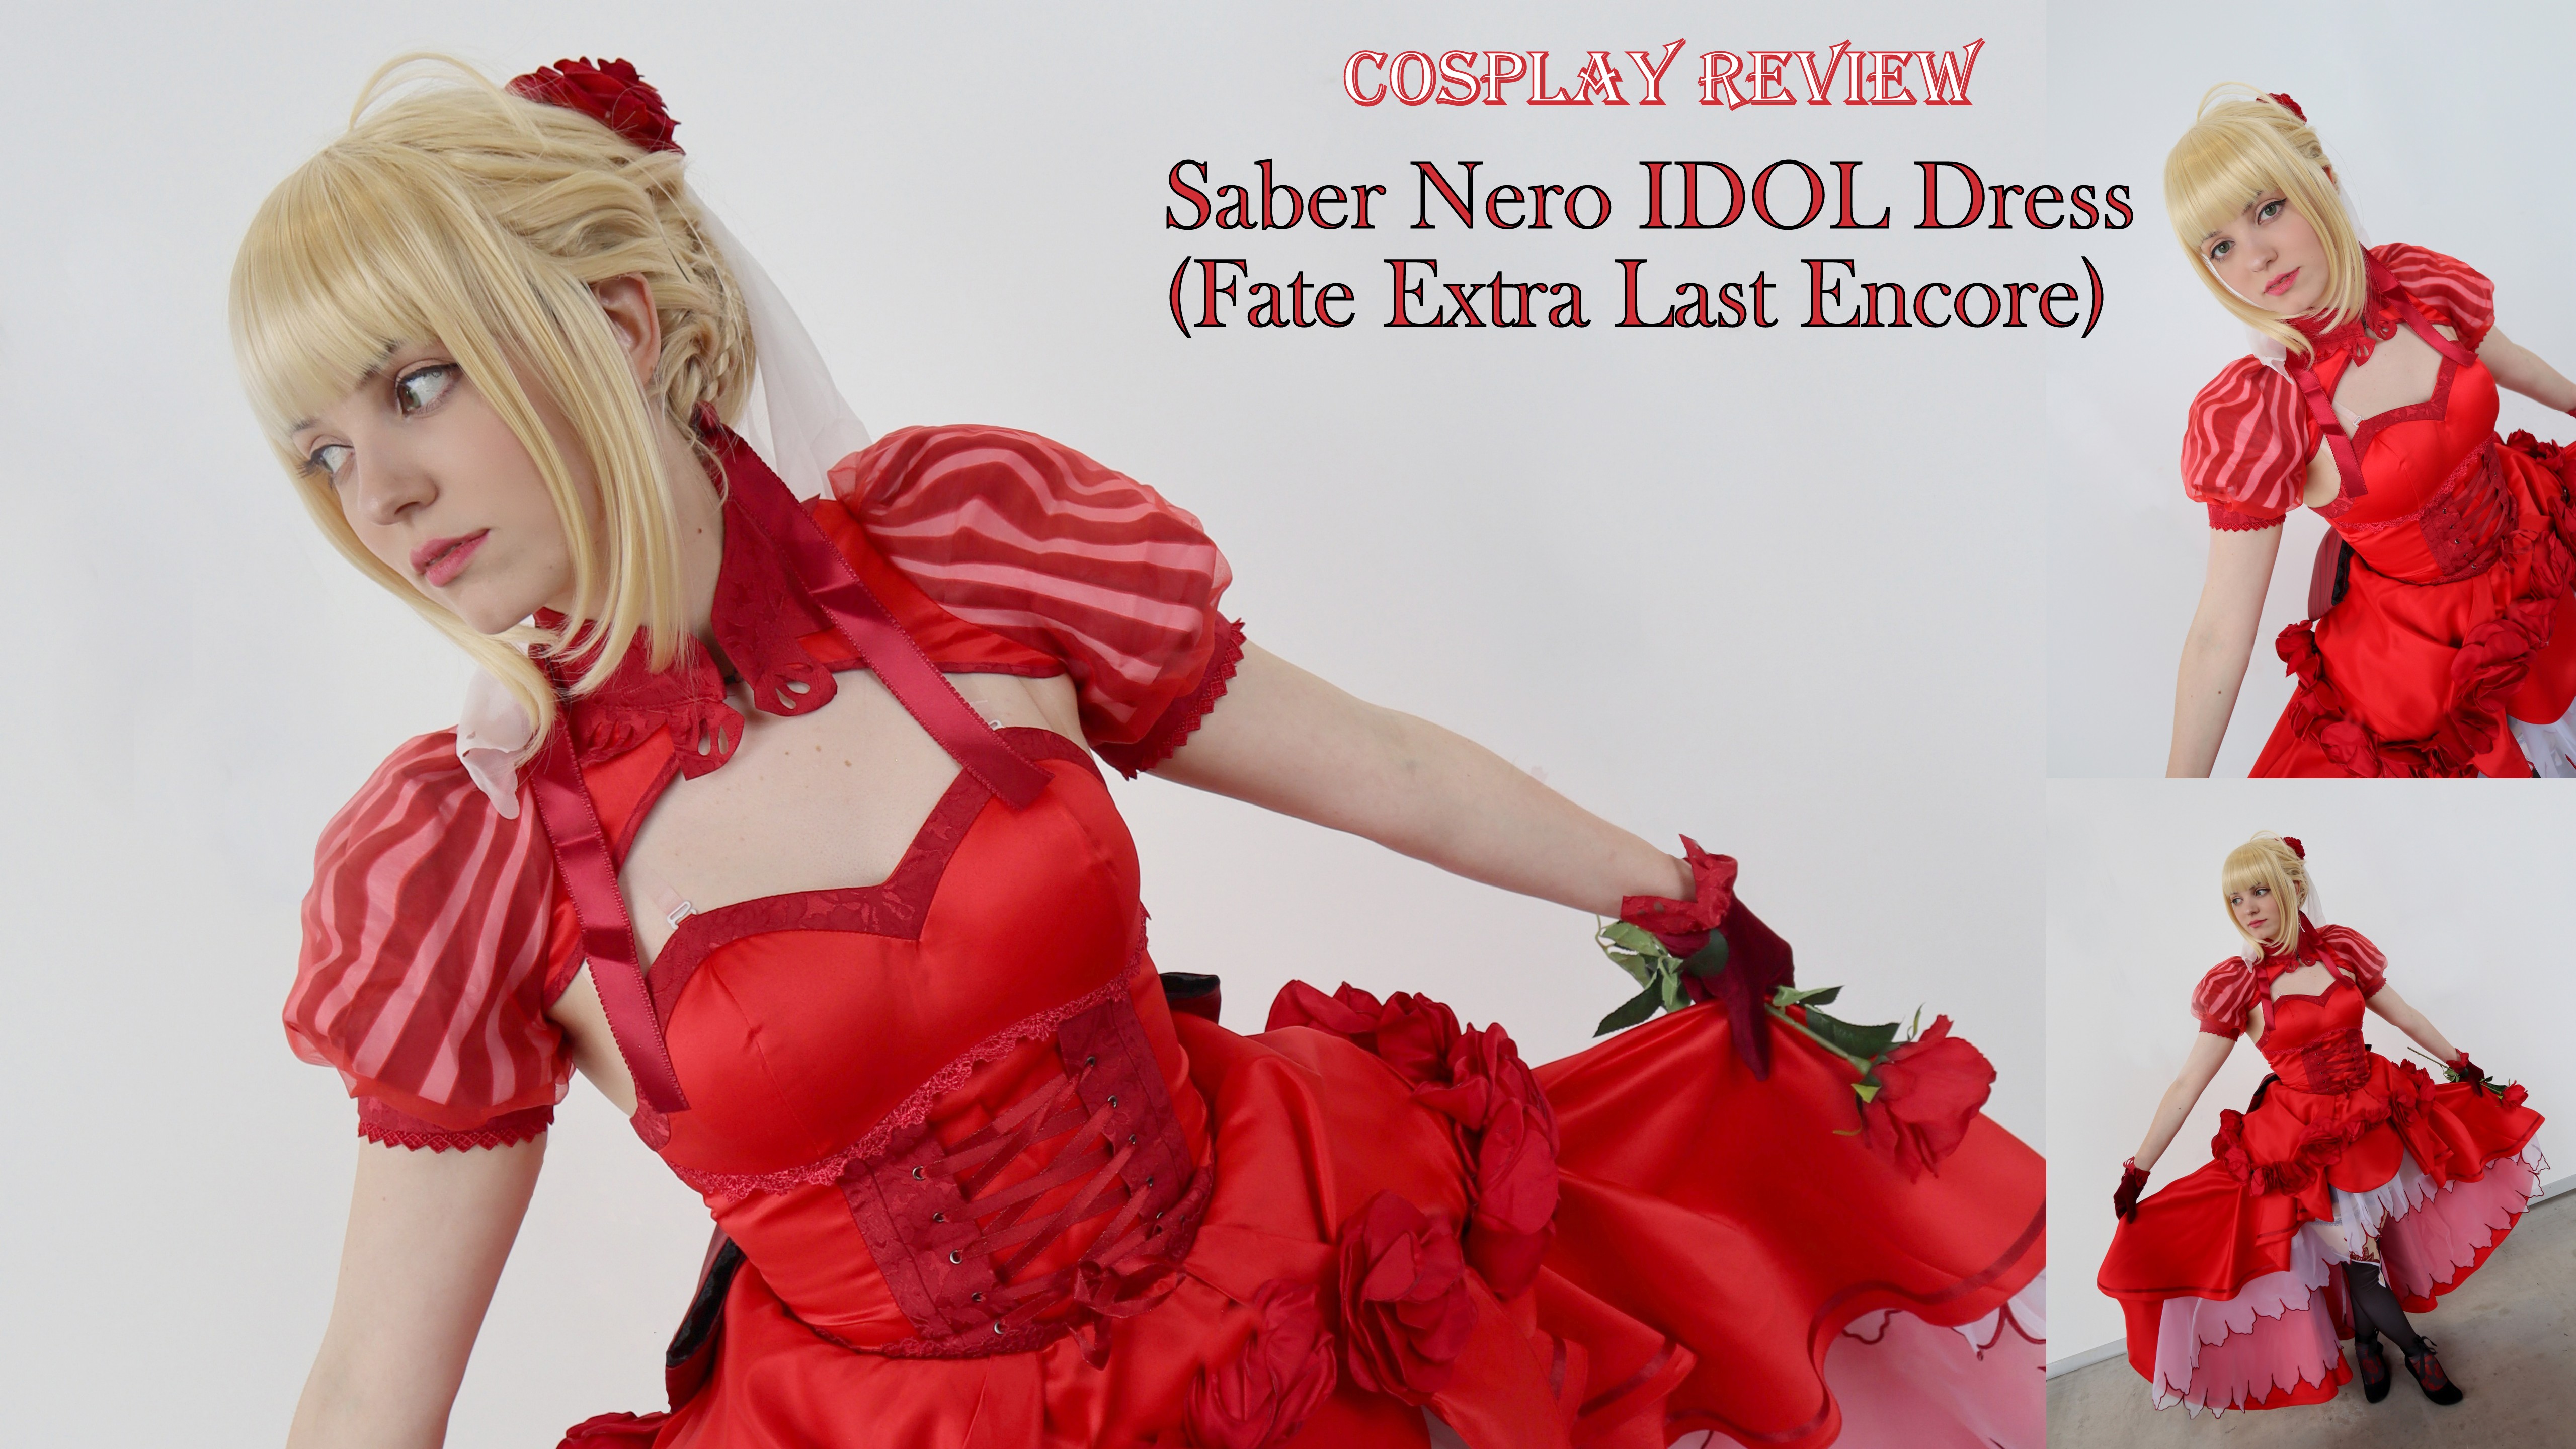 Cosplay Review: Saber Nero (Fate Extra Last Encore) Idol Dress from UWOWO